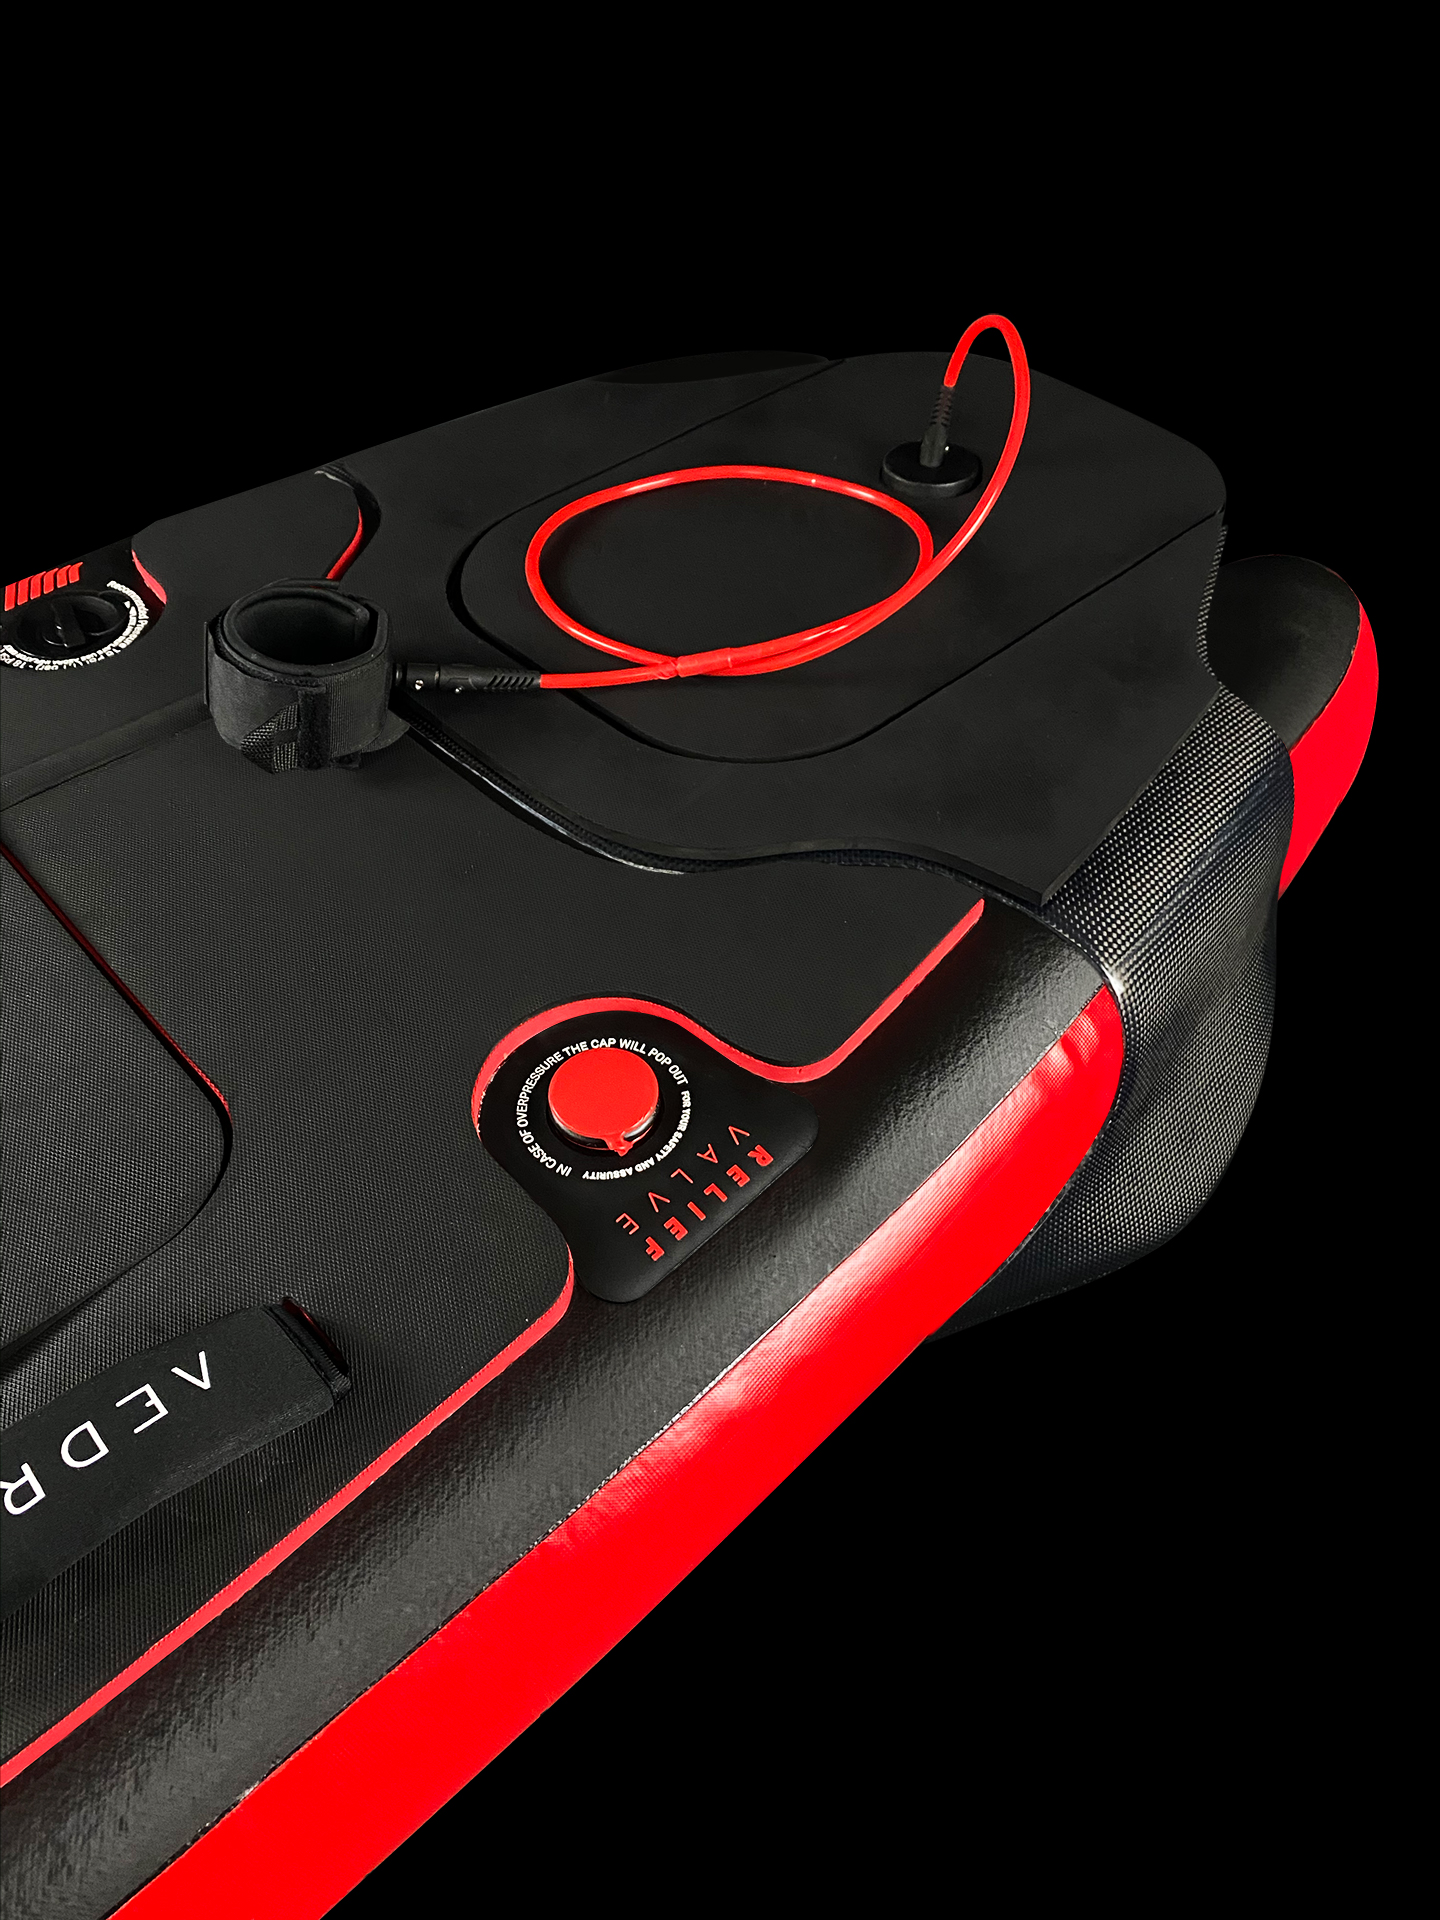 Electric Jetboard for watersports with controller